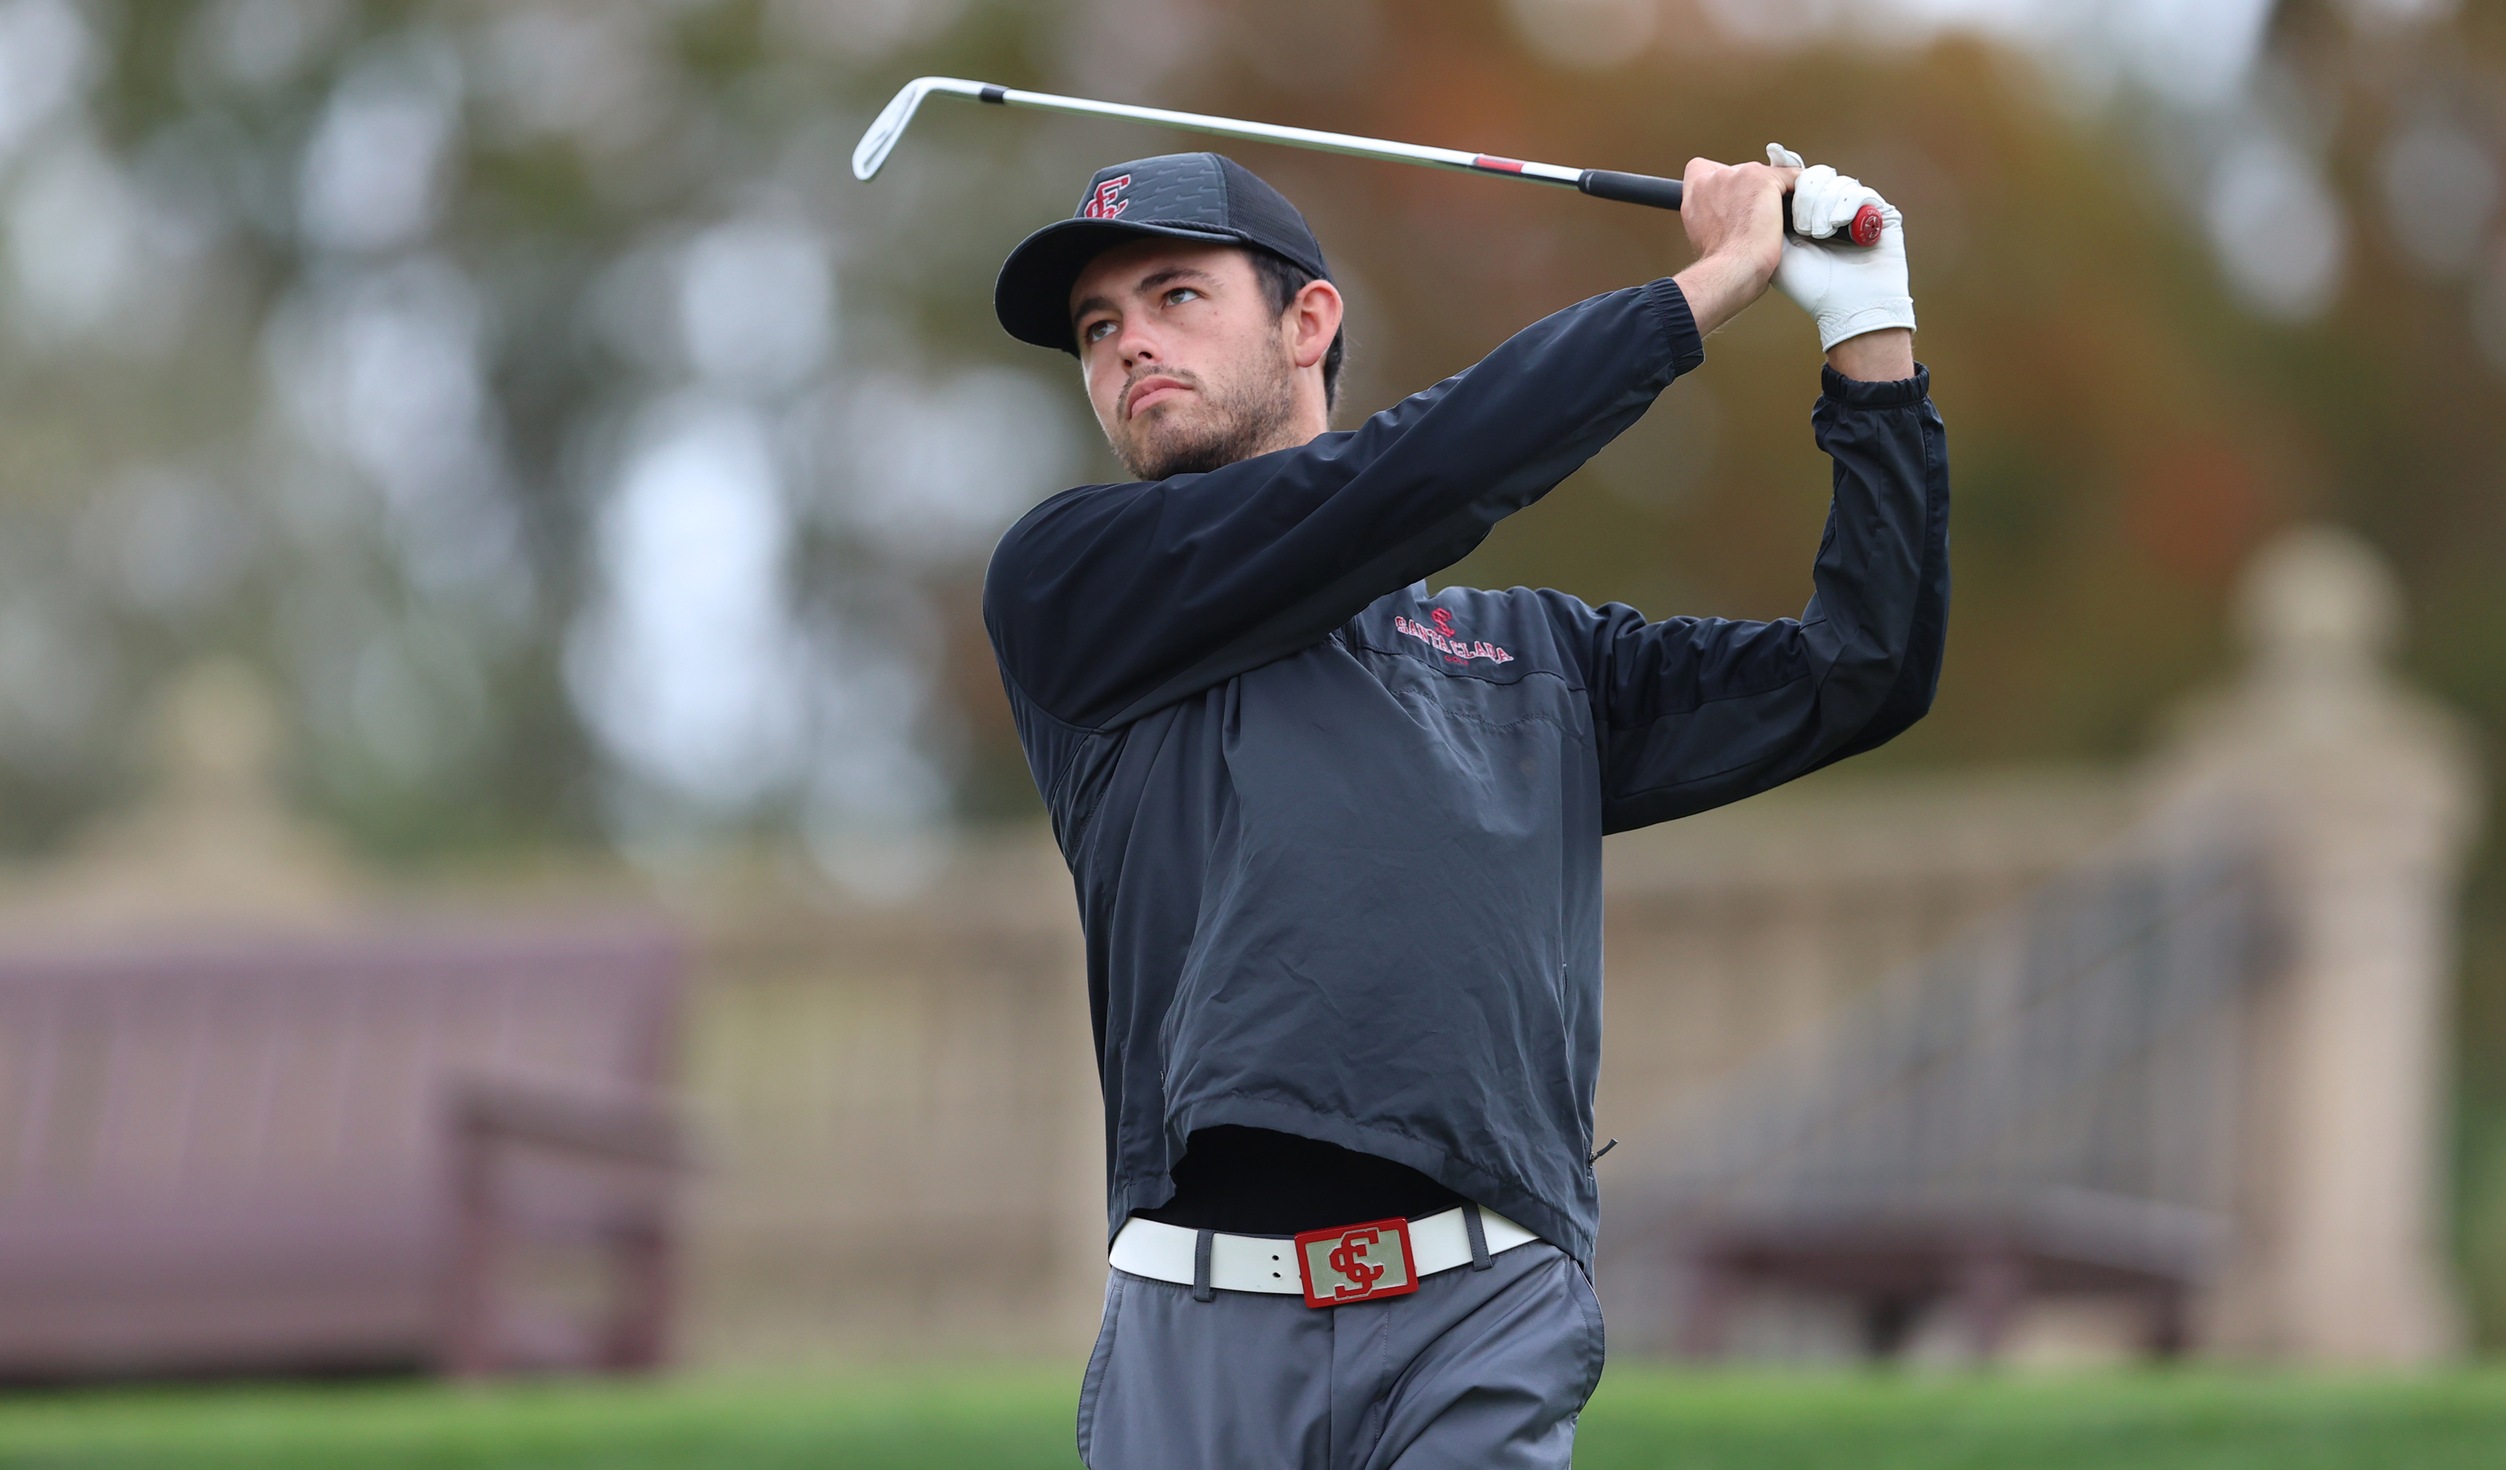 Avrit Ties For 15th To Lead Broncos On Final Day Of Desert Mountain Collegiate